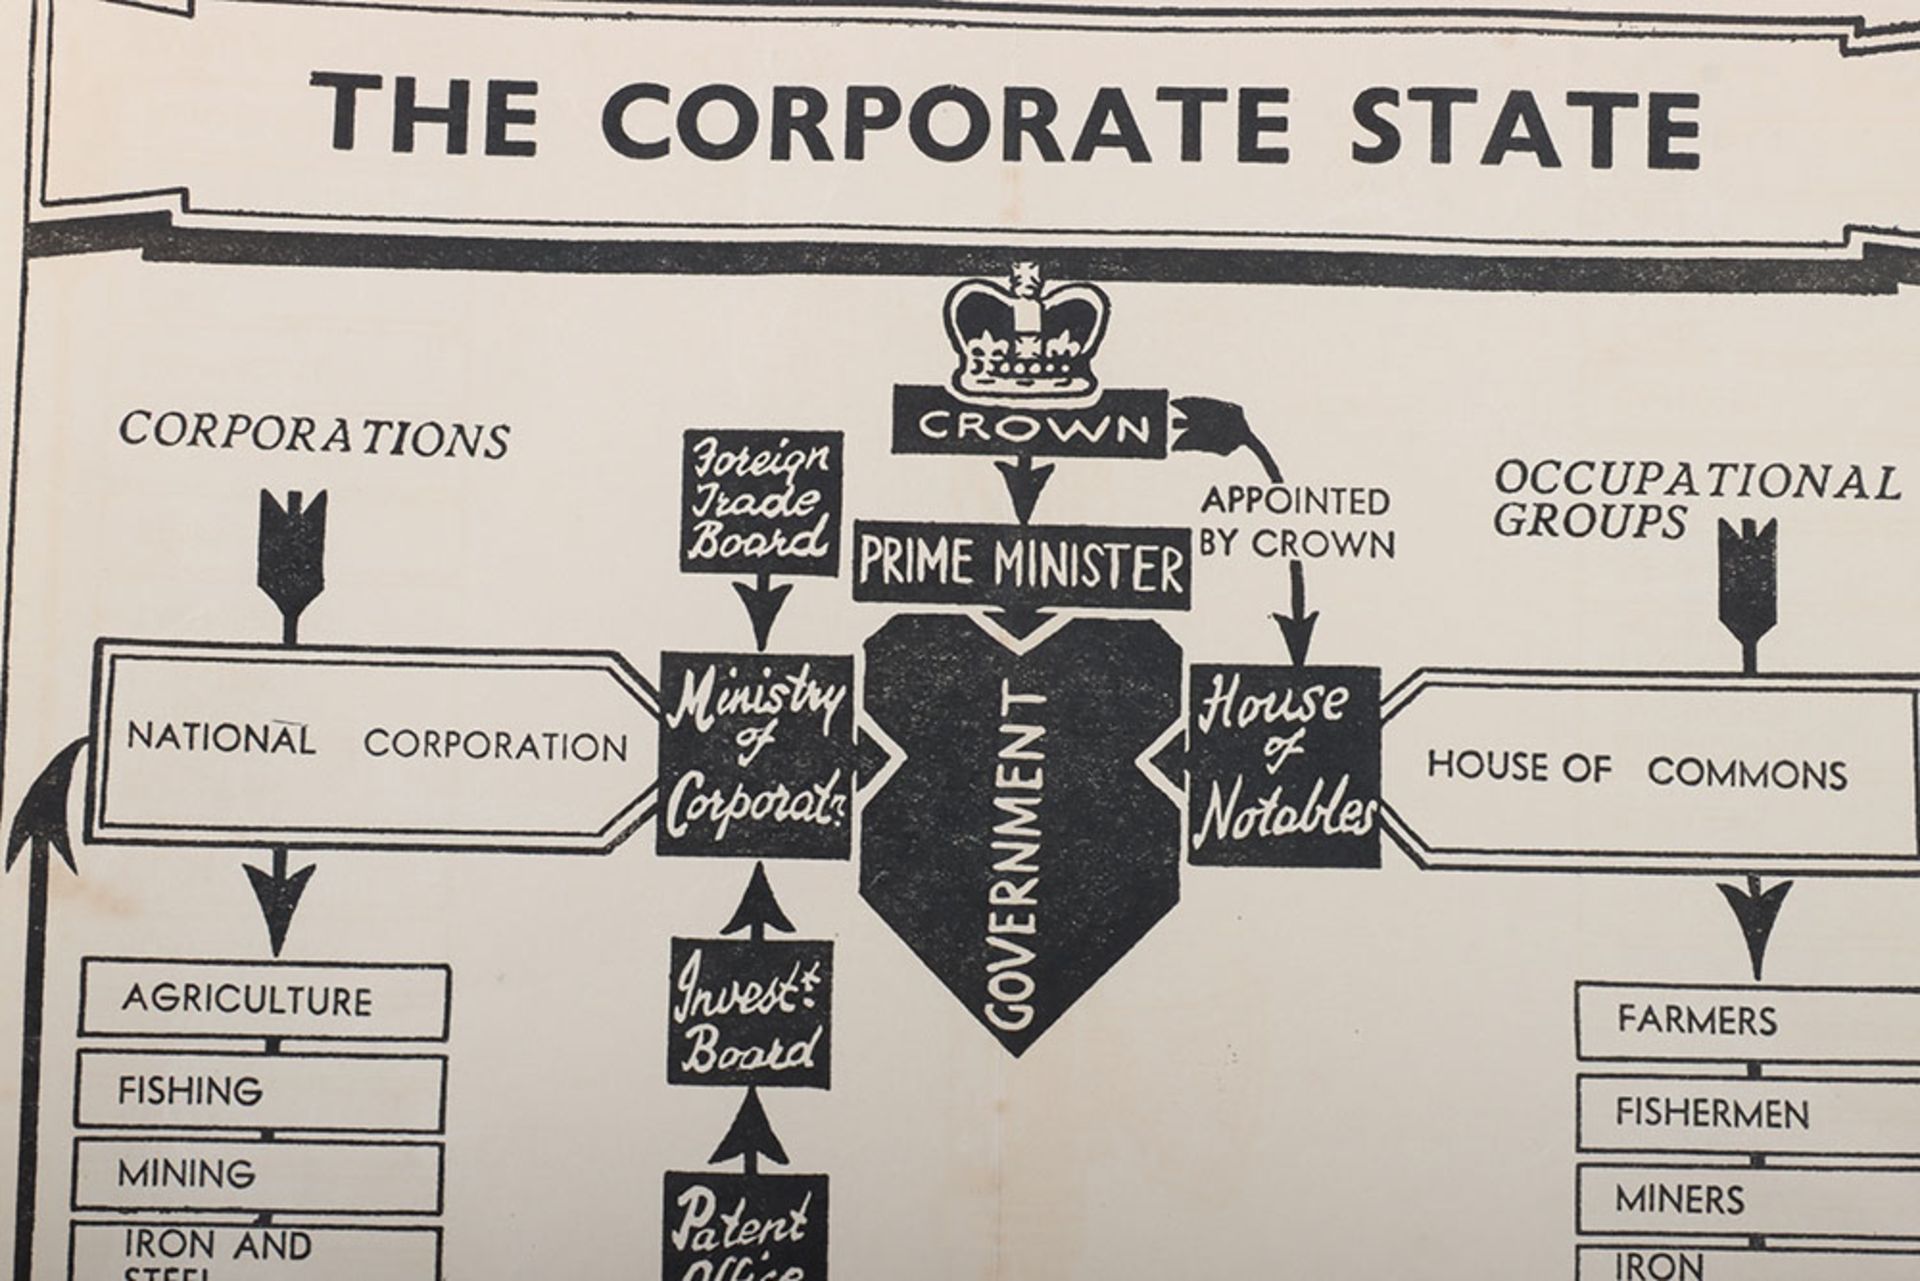 British Union of Fascists Poster "Corporate State" - Image 2 of 4